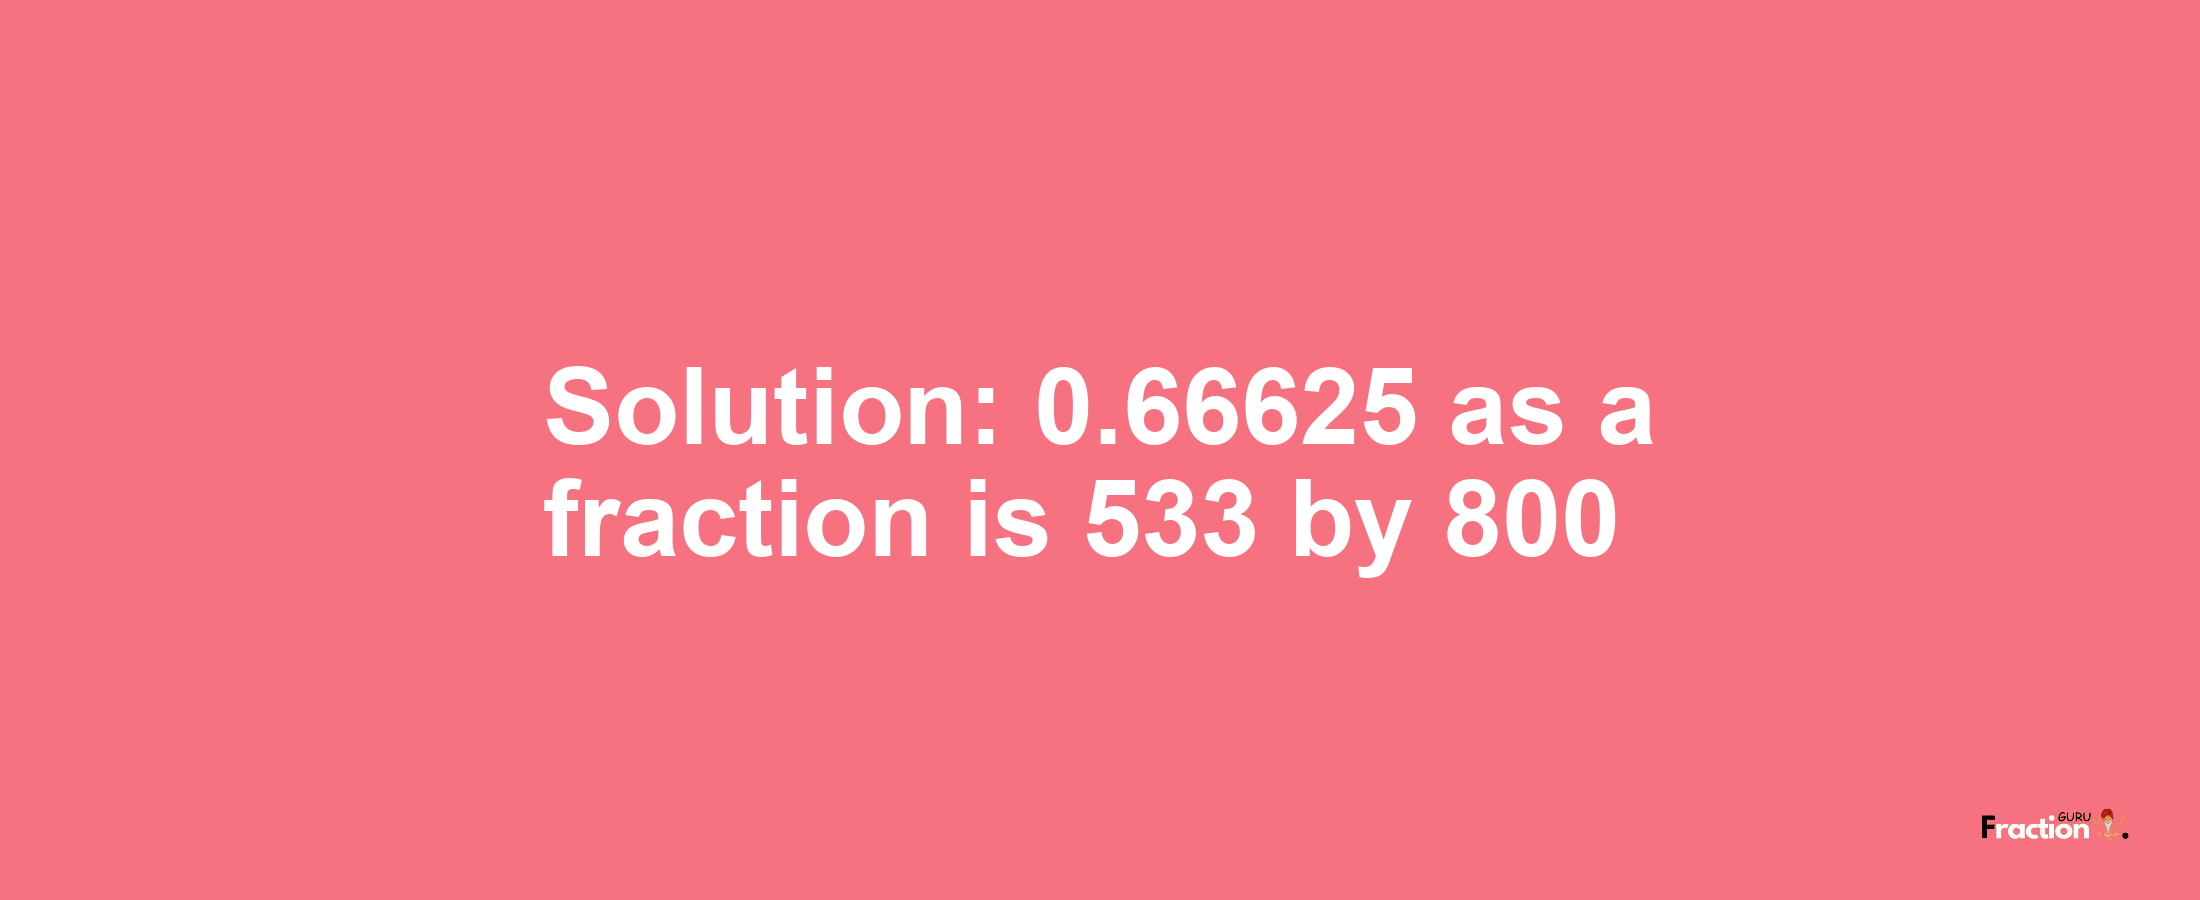 Solution:0.66625 as a fraction is 533/800